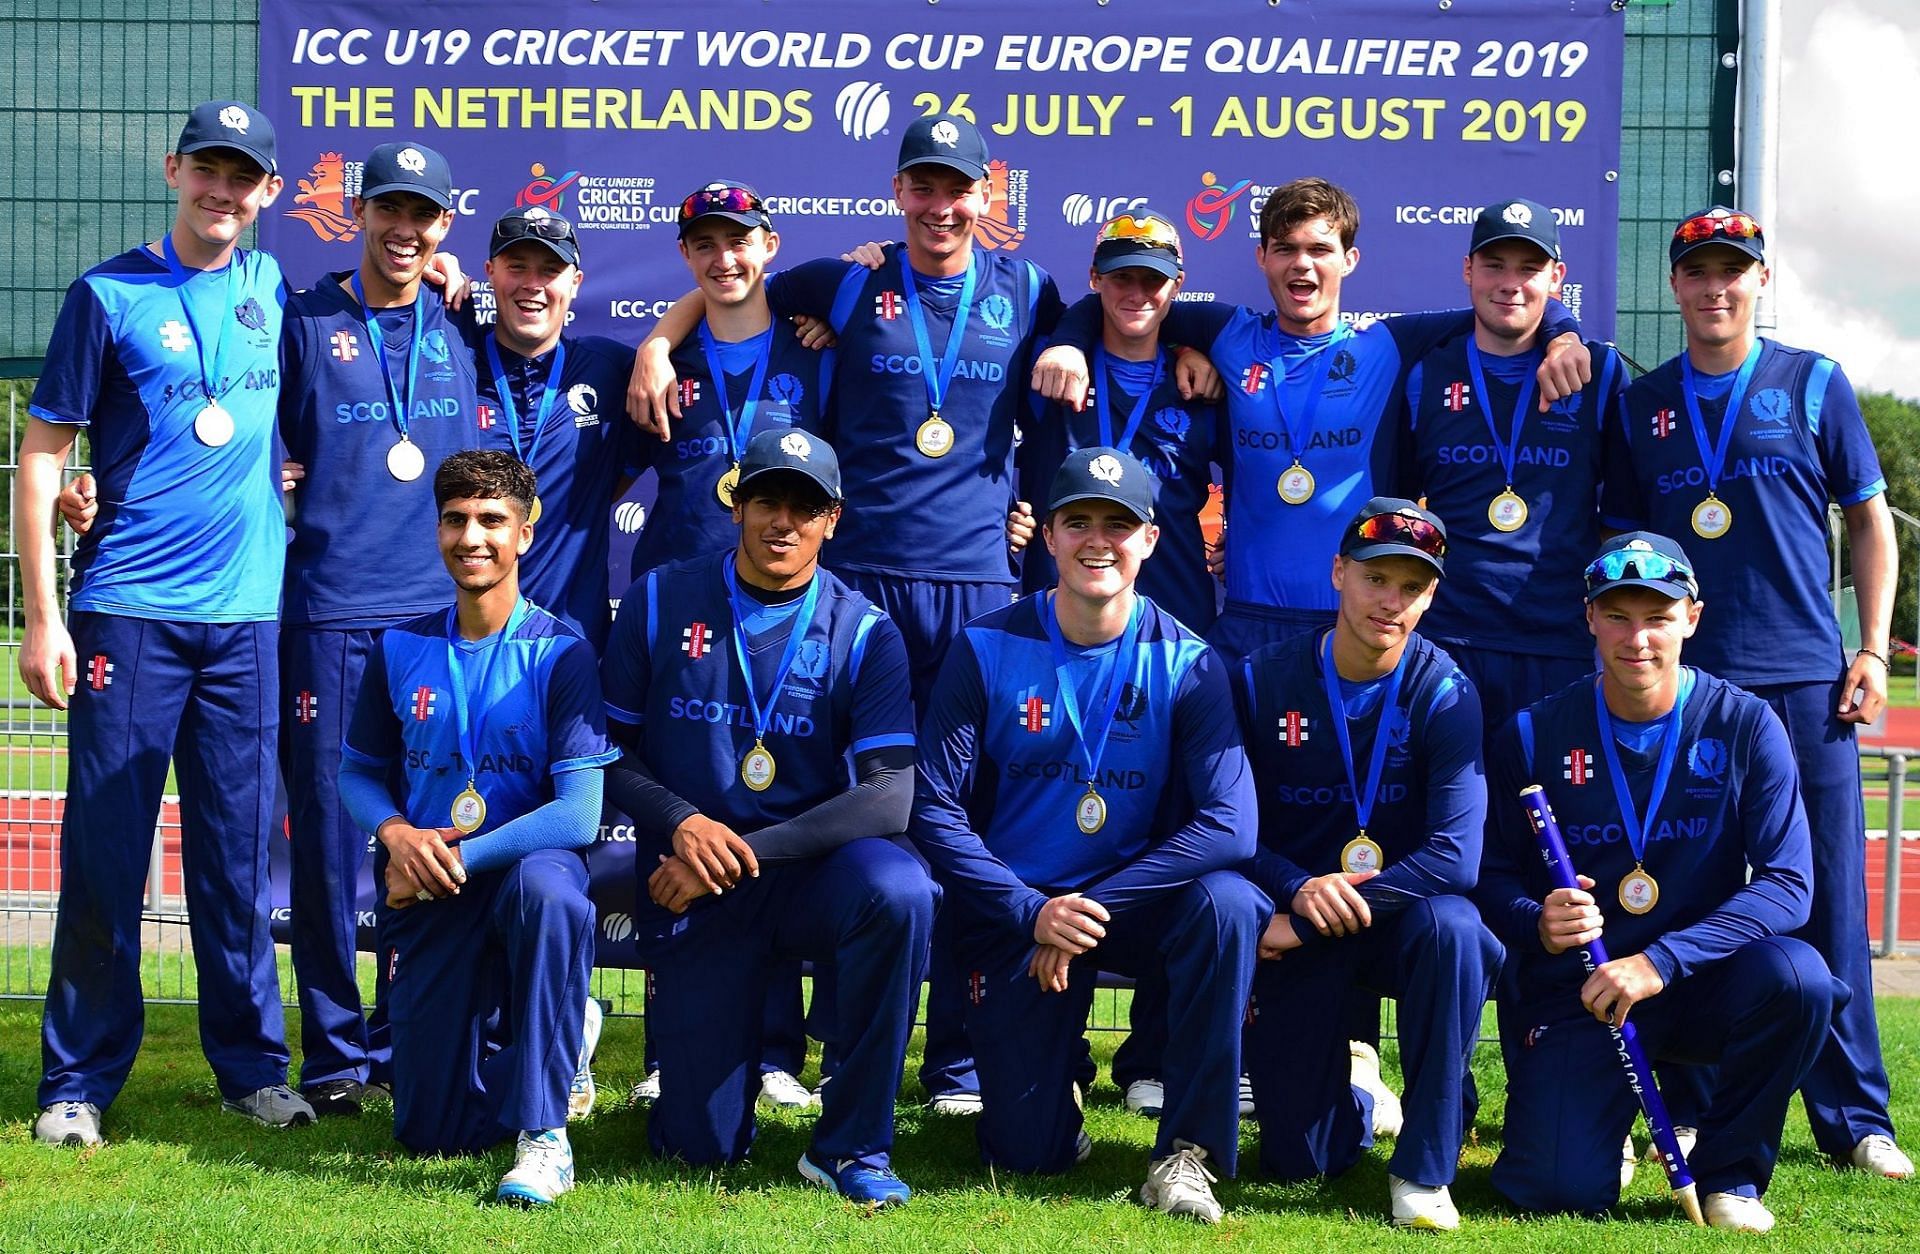 Scotland are looking for their first win in the U19 WC.